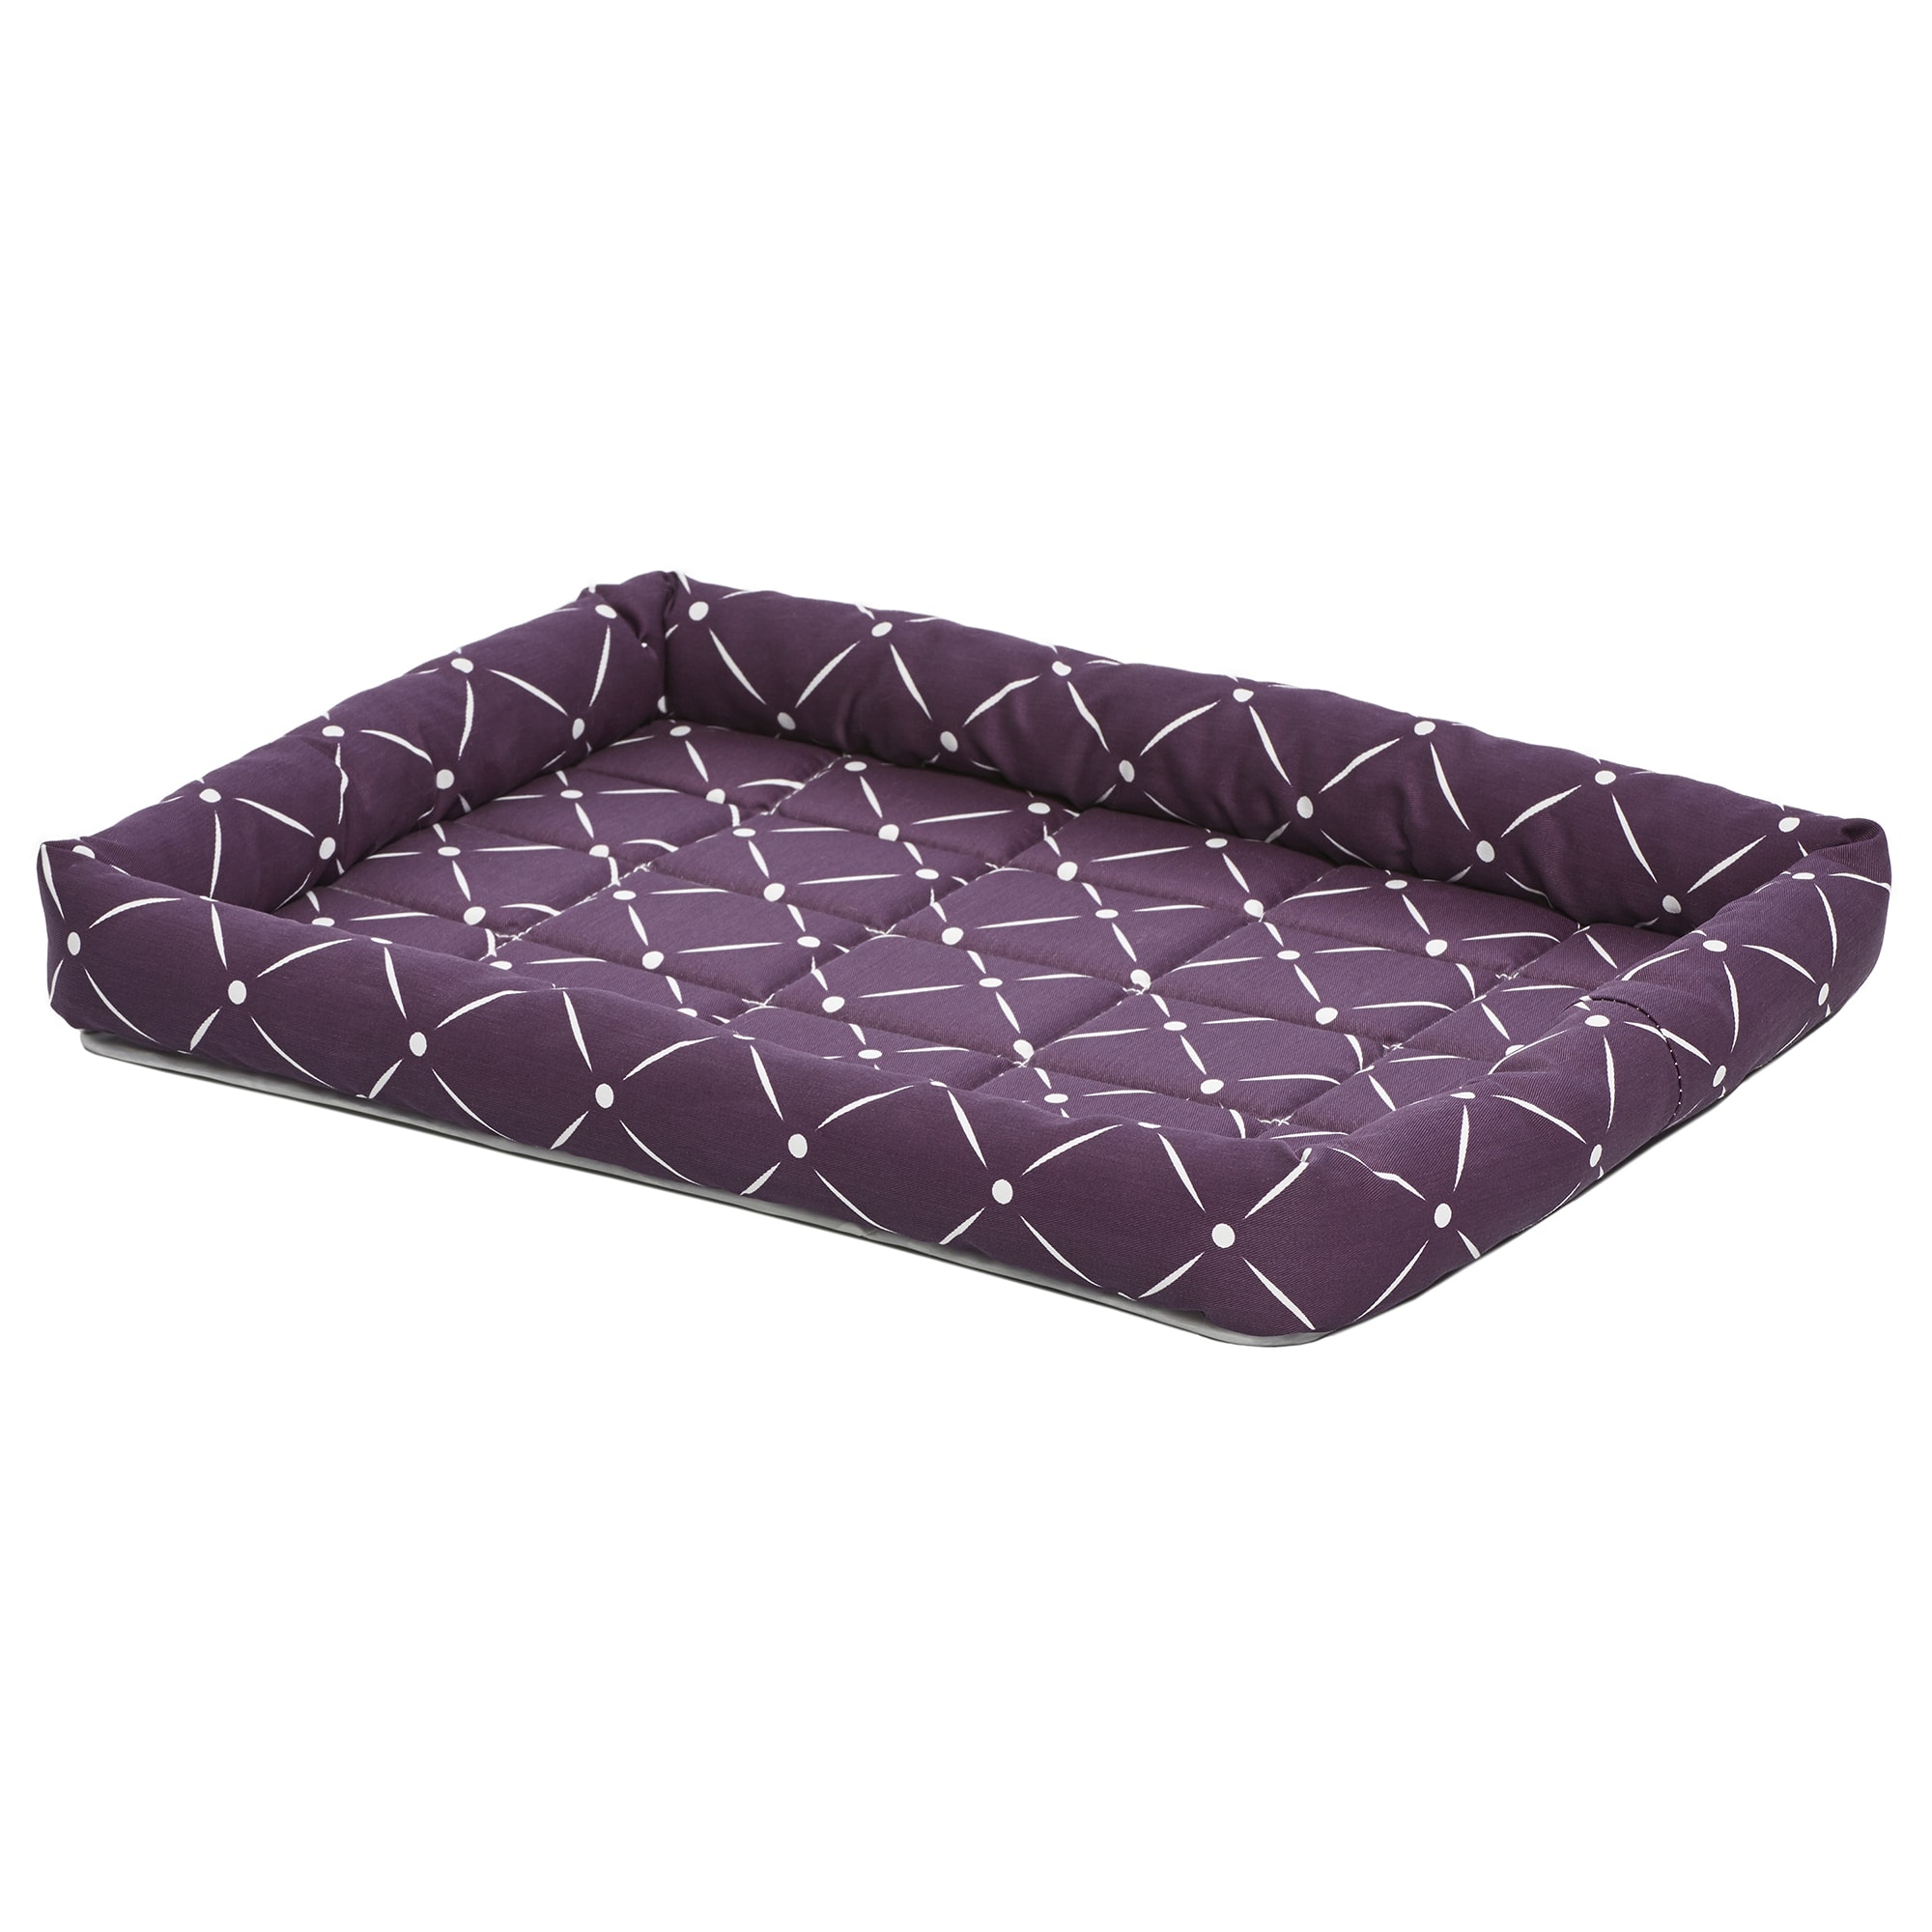 Pucci Vuitton Steps 2 Greatness Pet Bed